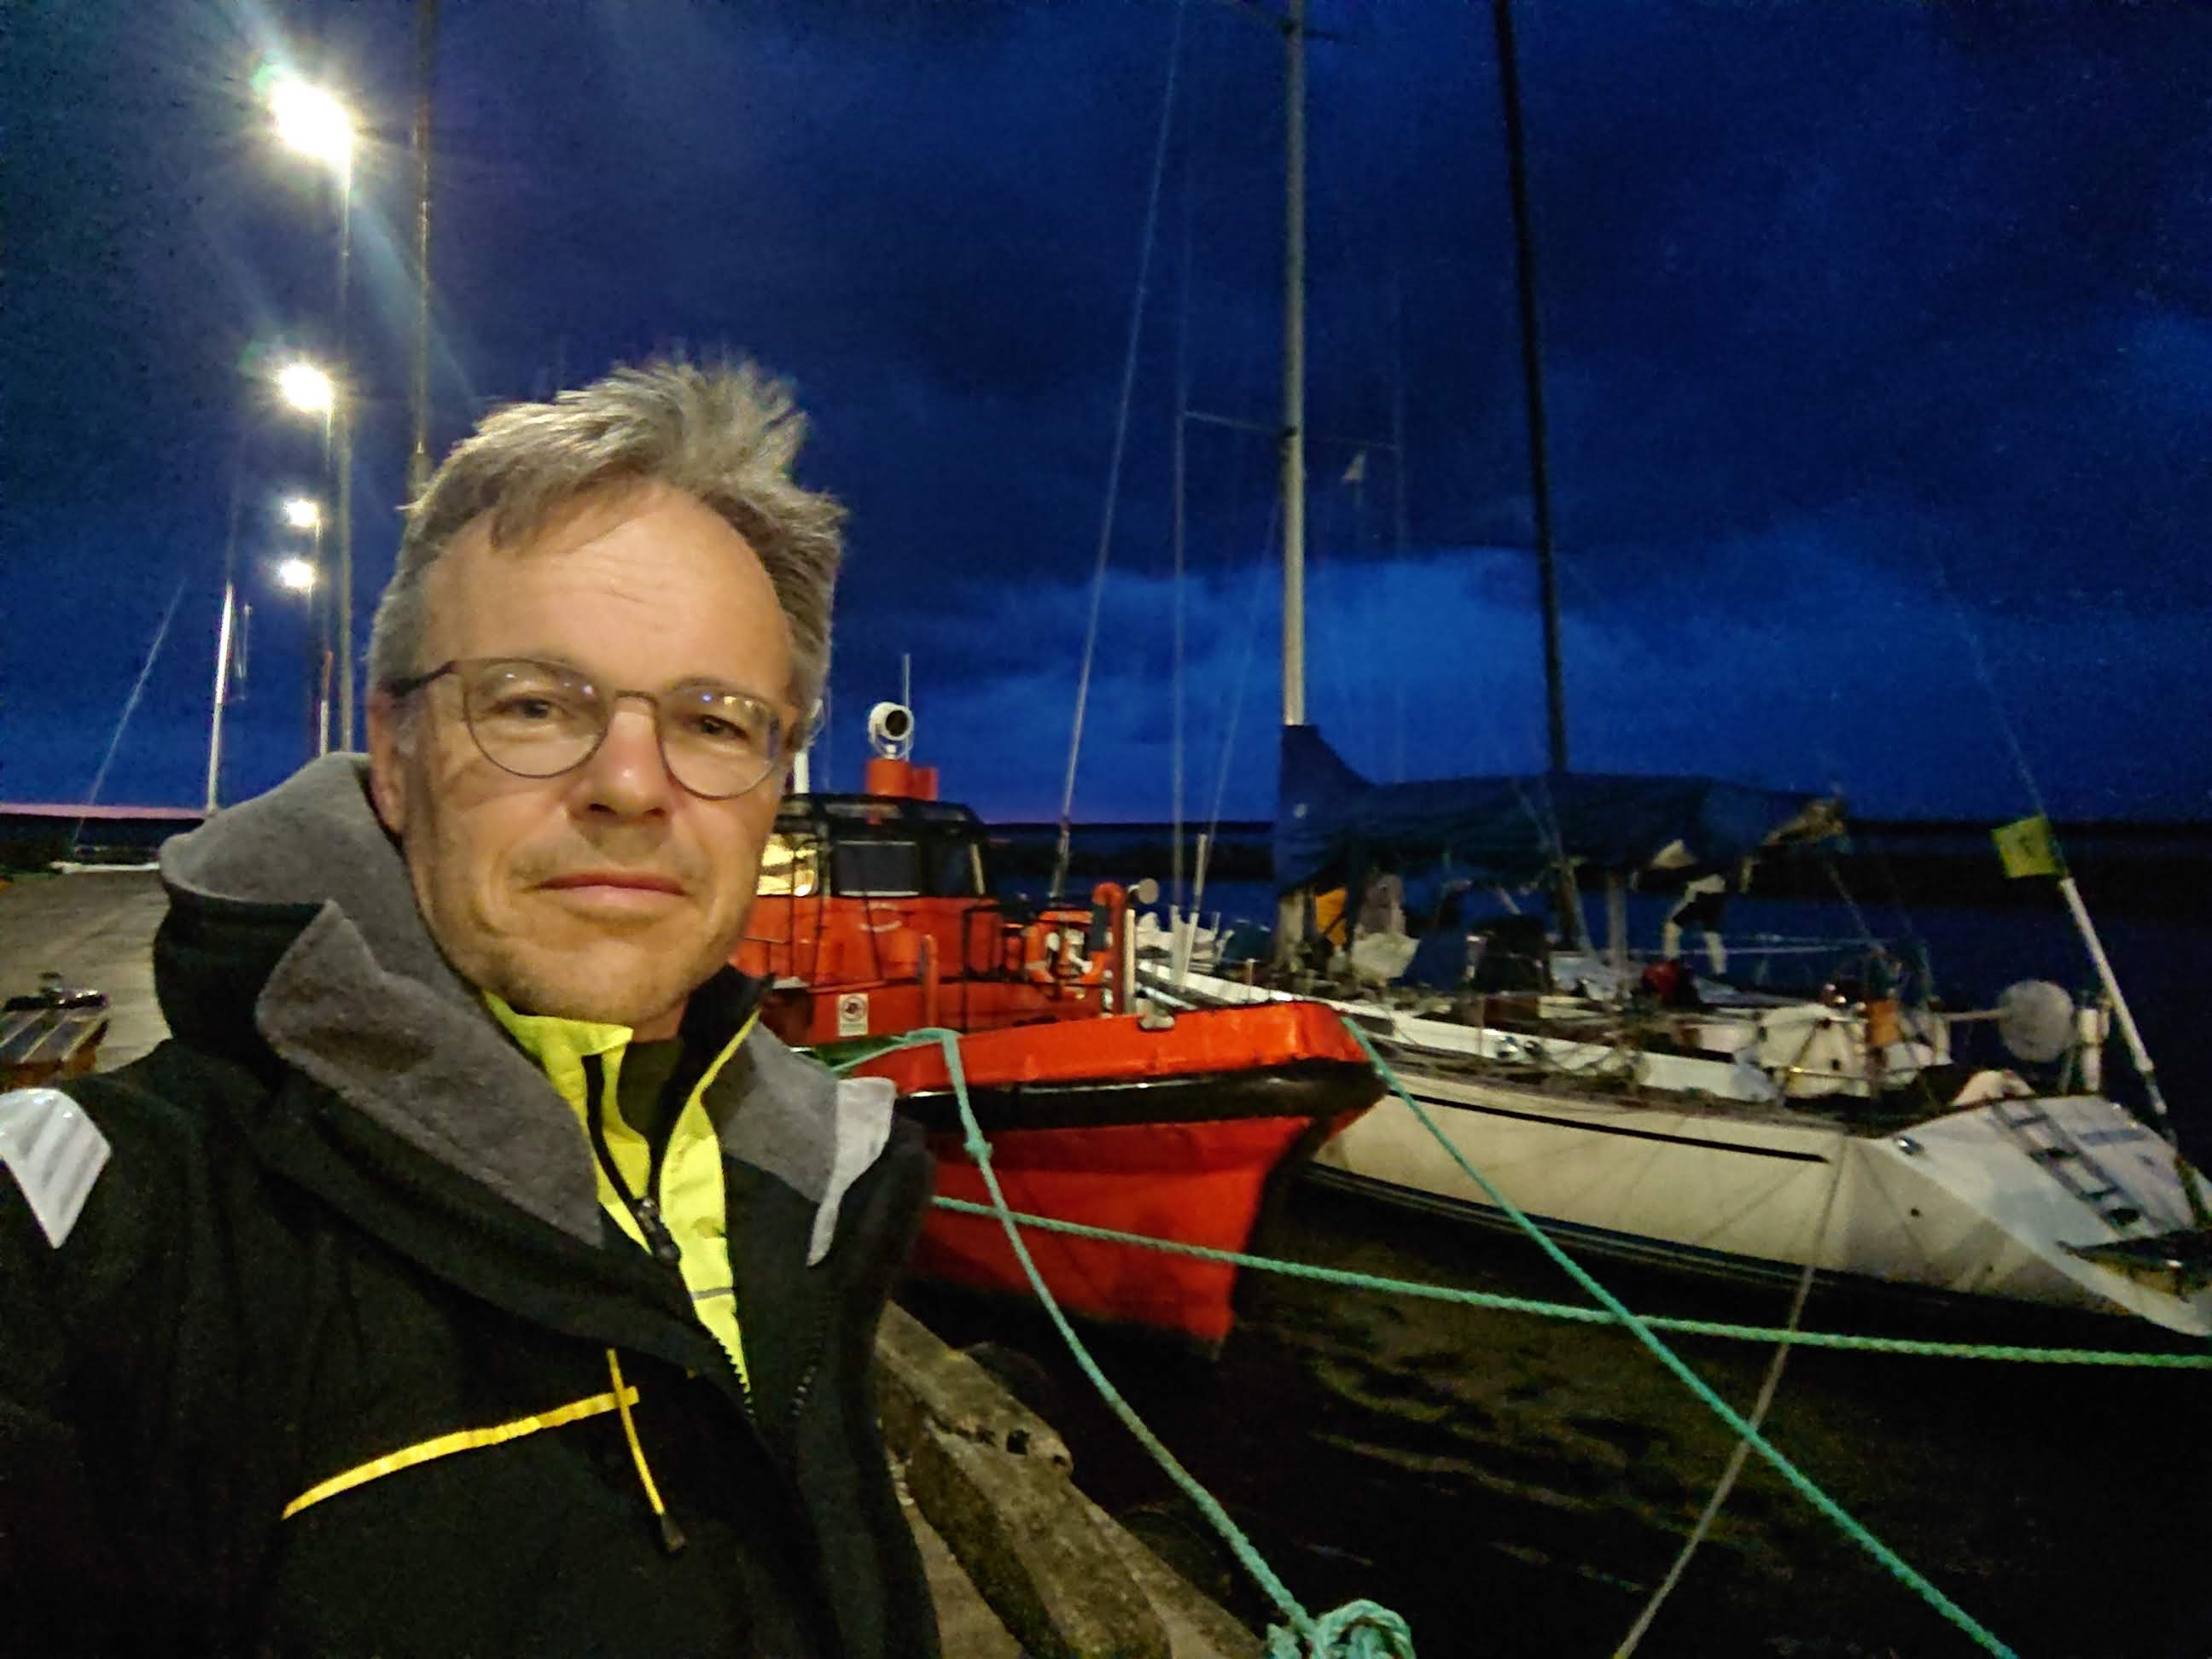 Portrait of Martin Hedberg with boats in the background.